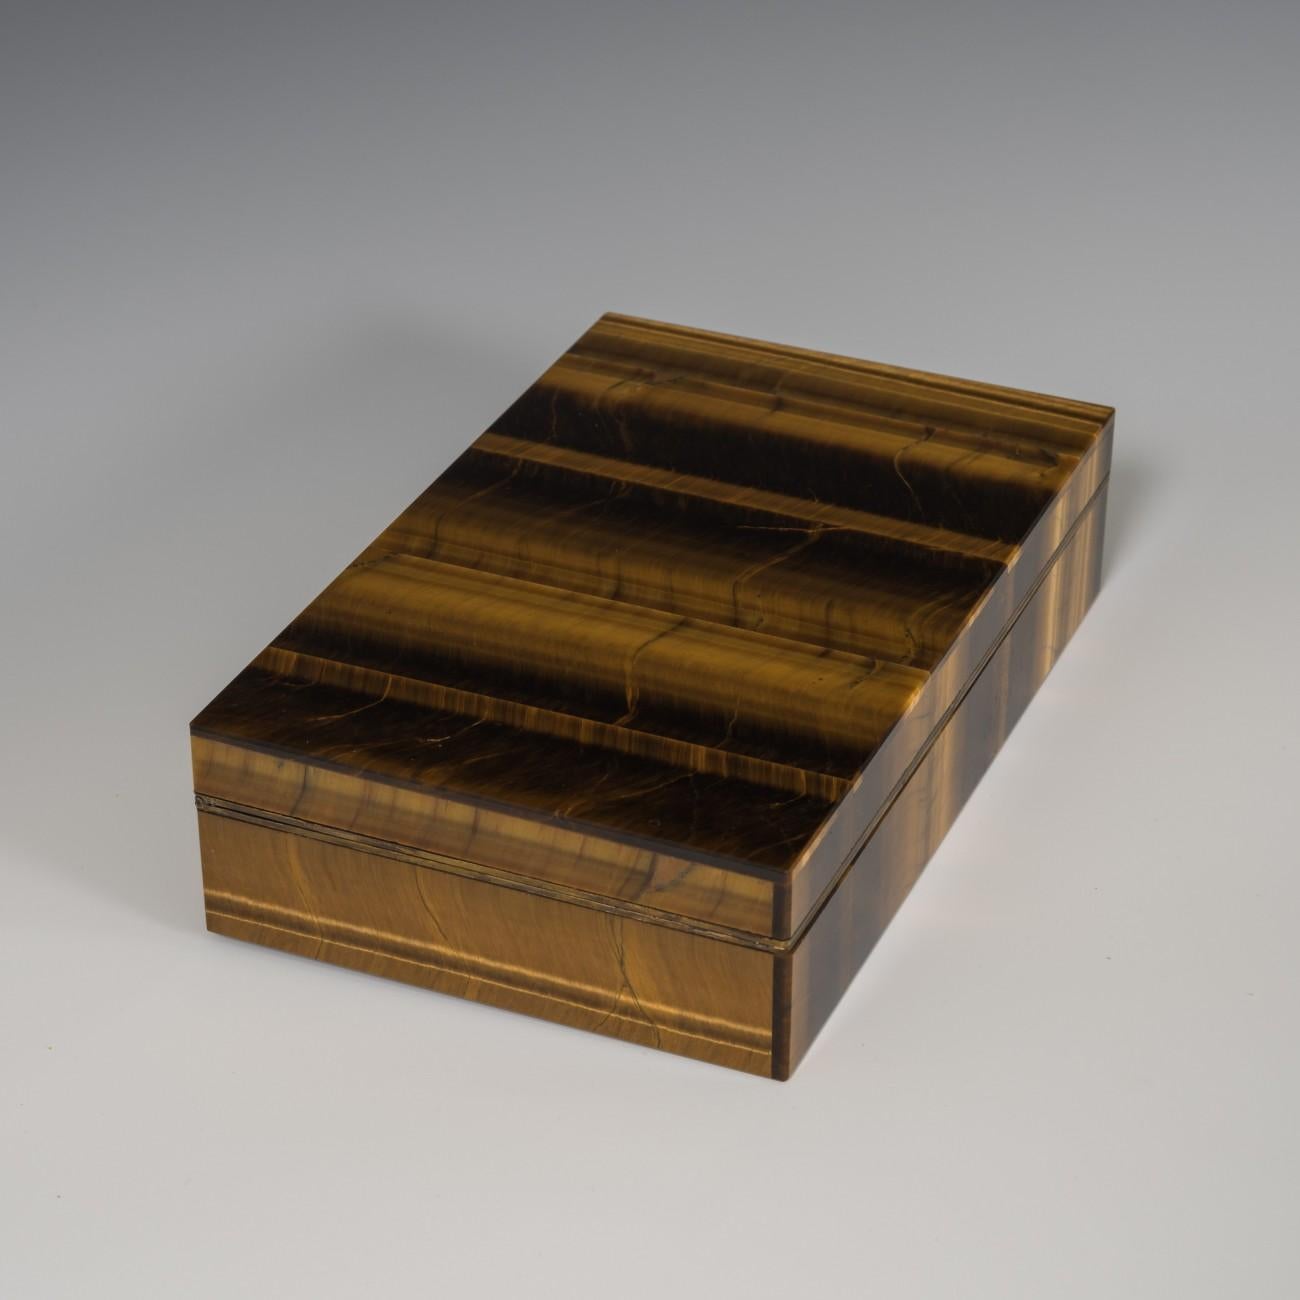 A stylish box made from tiger's eye with bands of brown and gold color running through the stone. Originally used as a cigarette box, a silver gilt hinge and frame join the top and bottom sections. Stamped with the Italian silver mark for 800